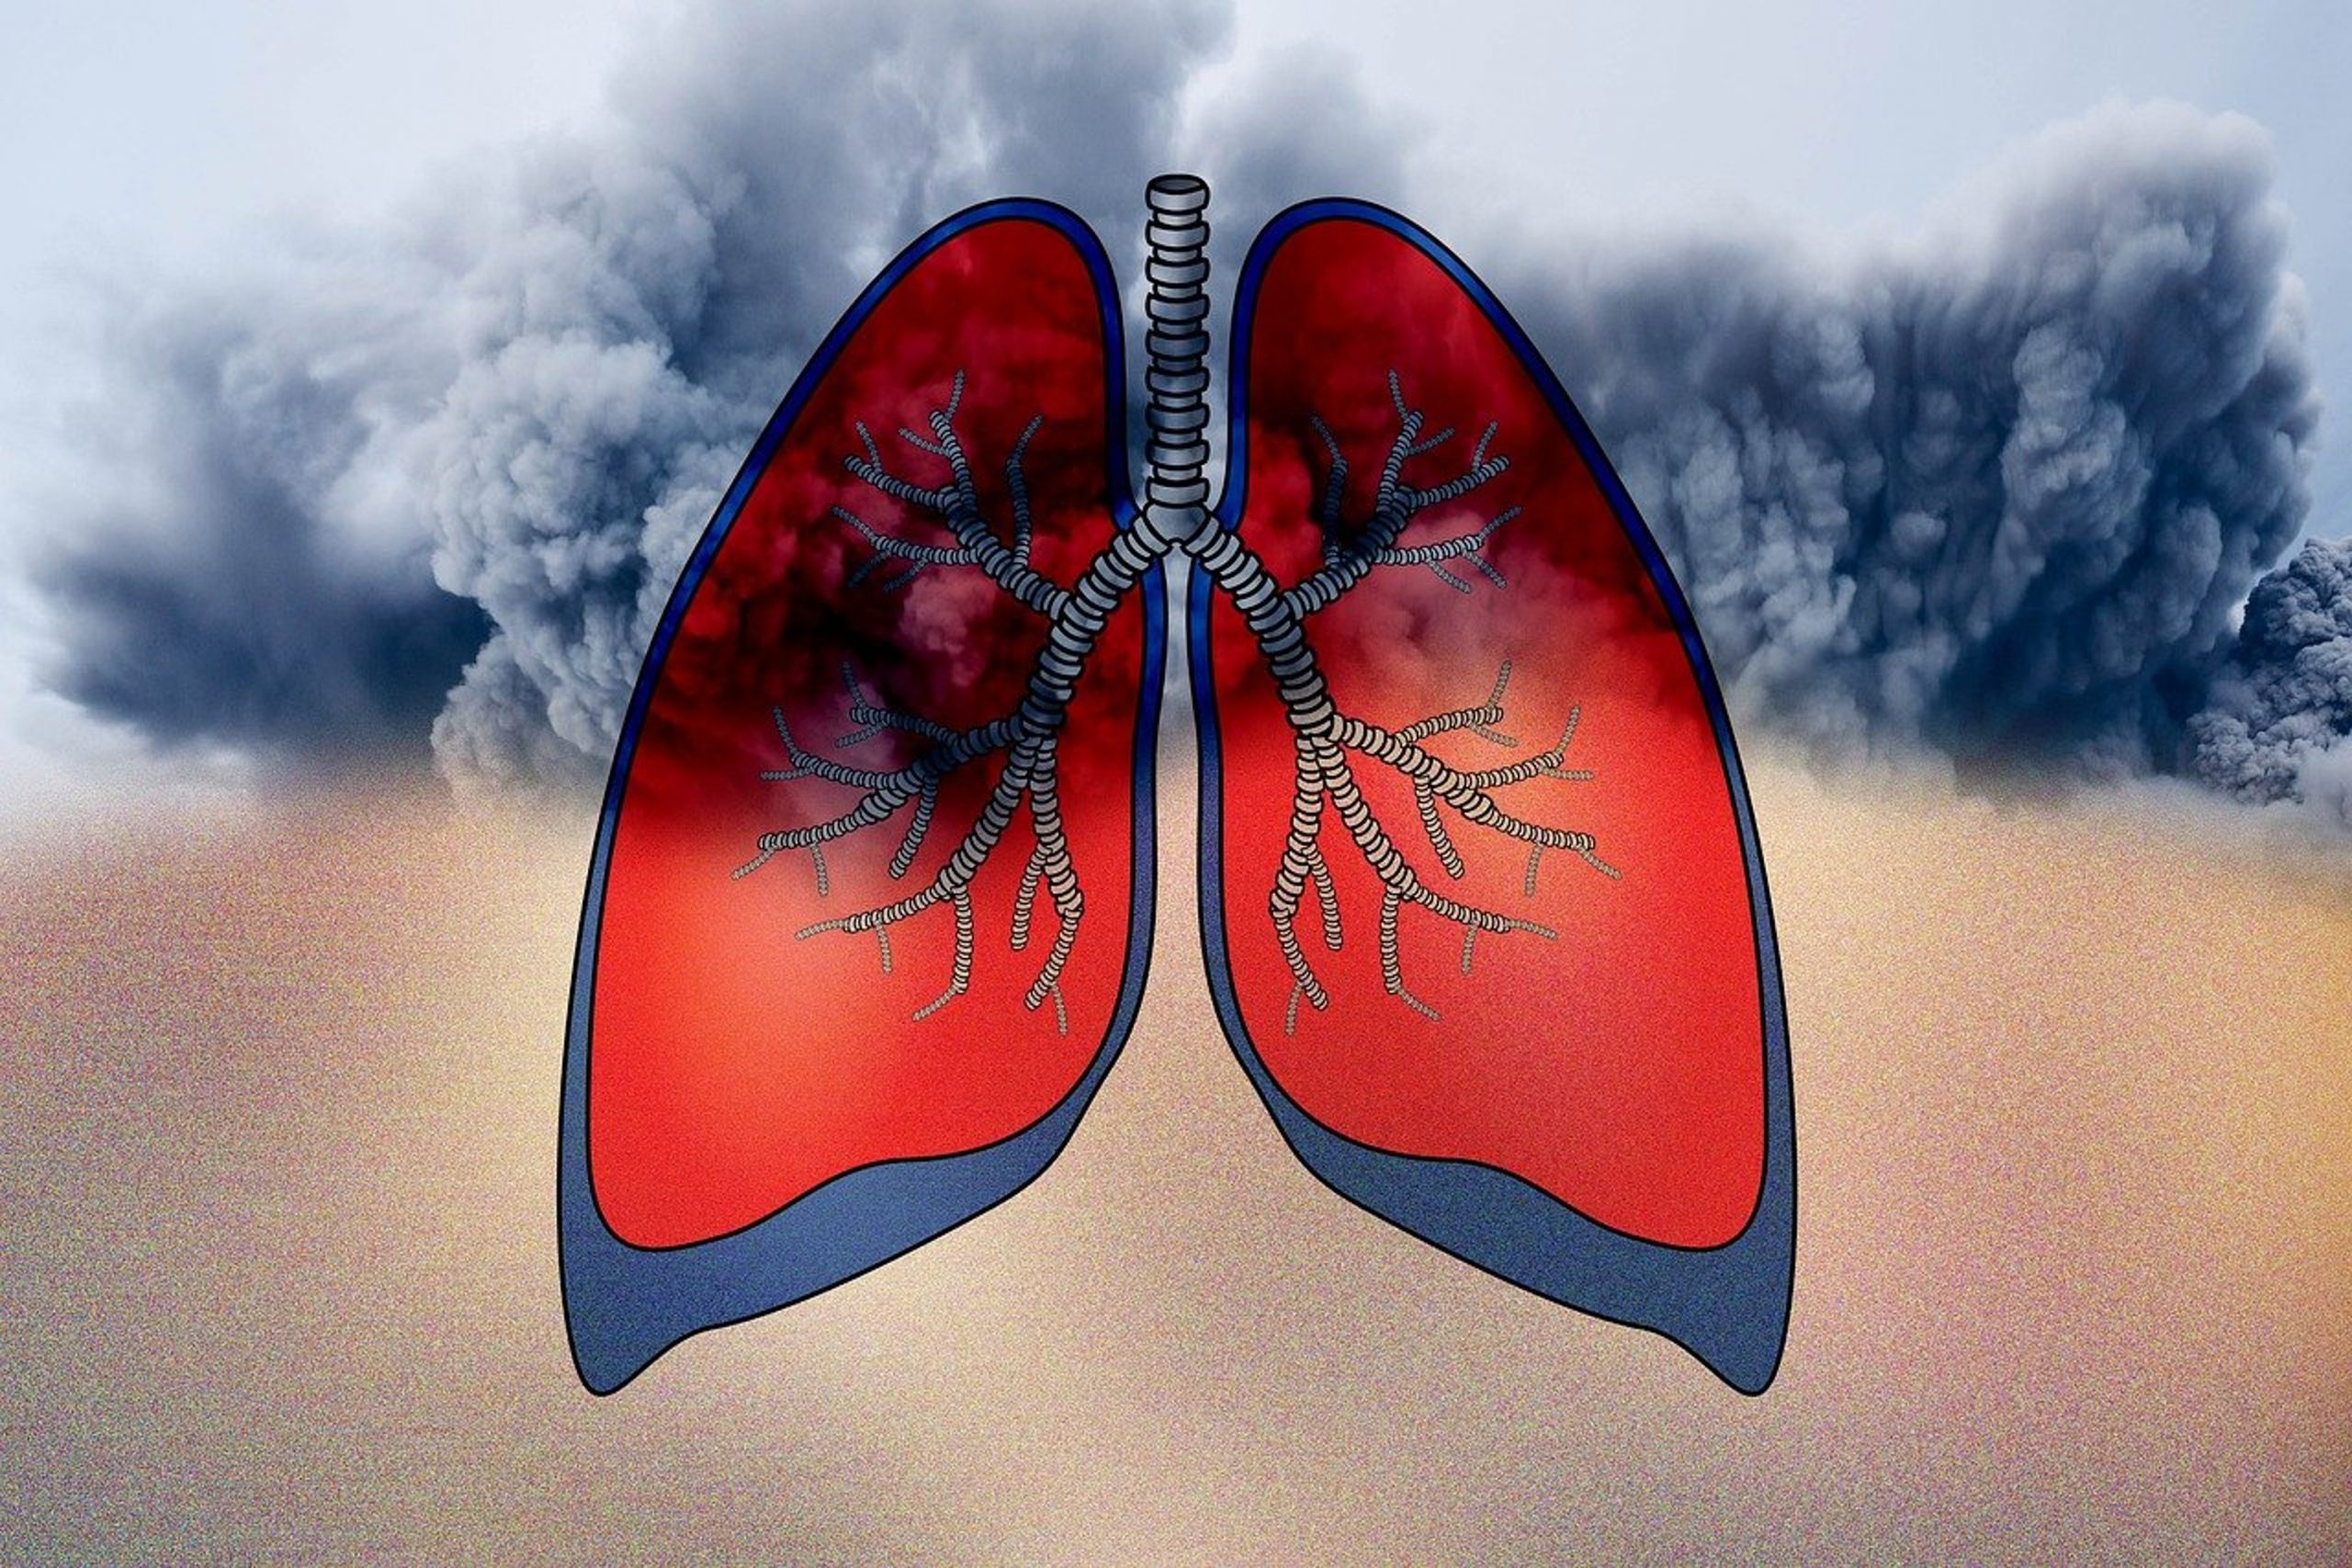 Headline: Understanding Asthma Symptoms: What You Should Know